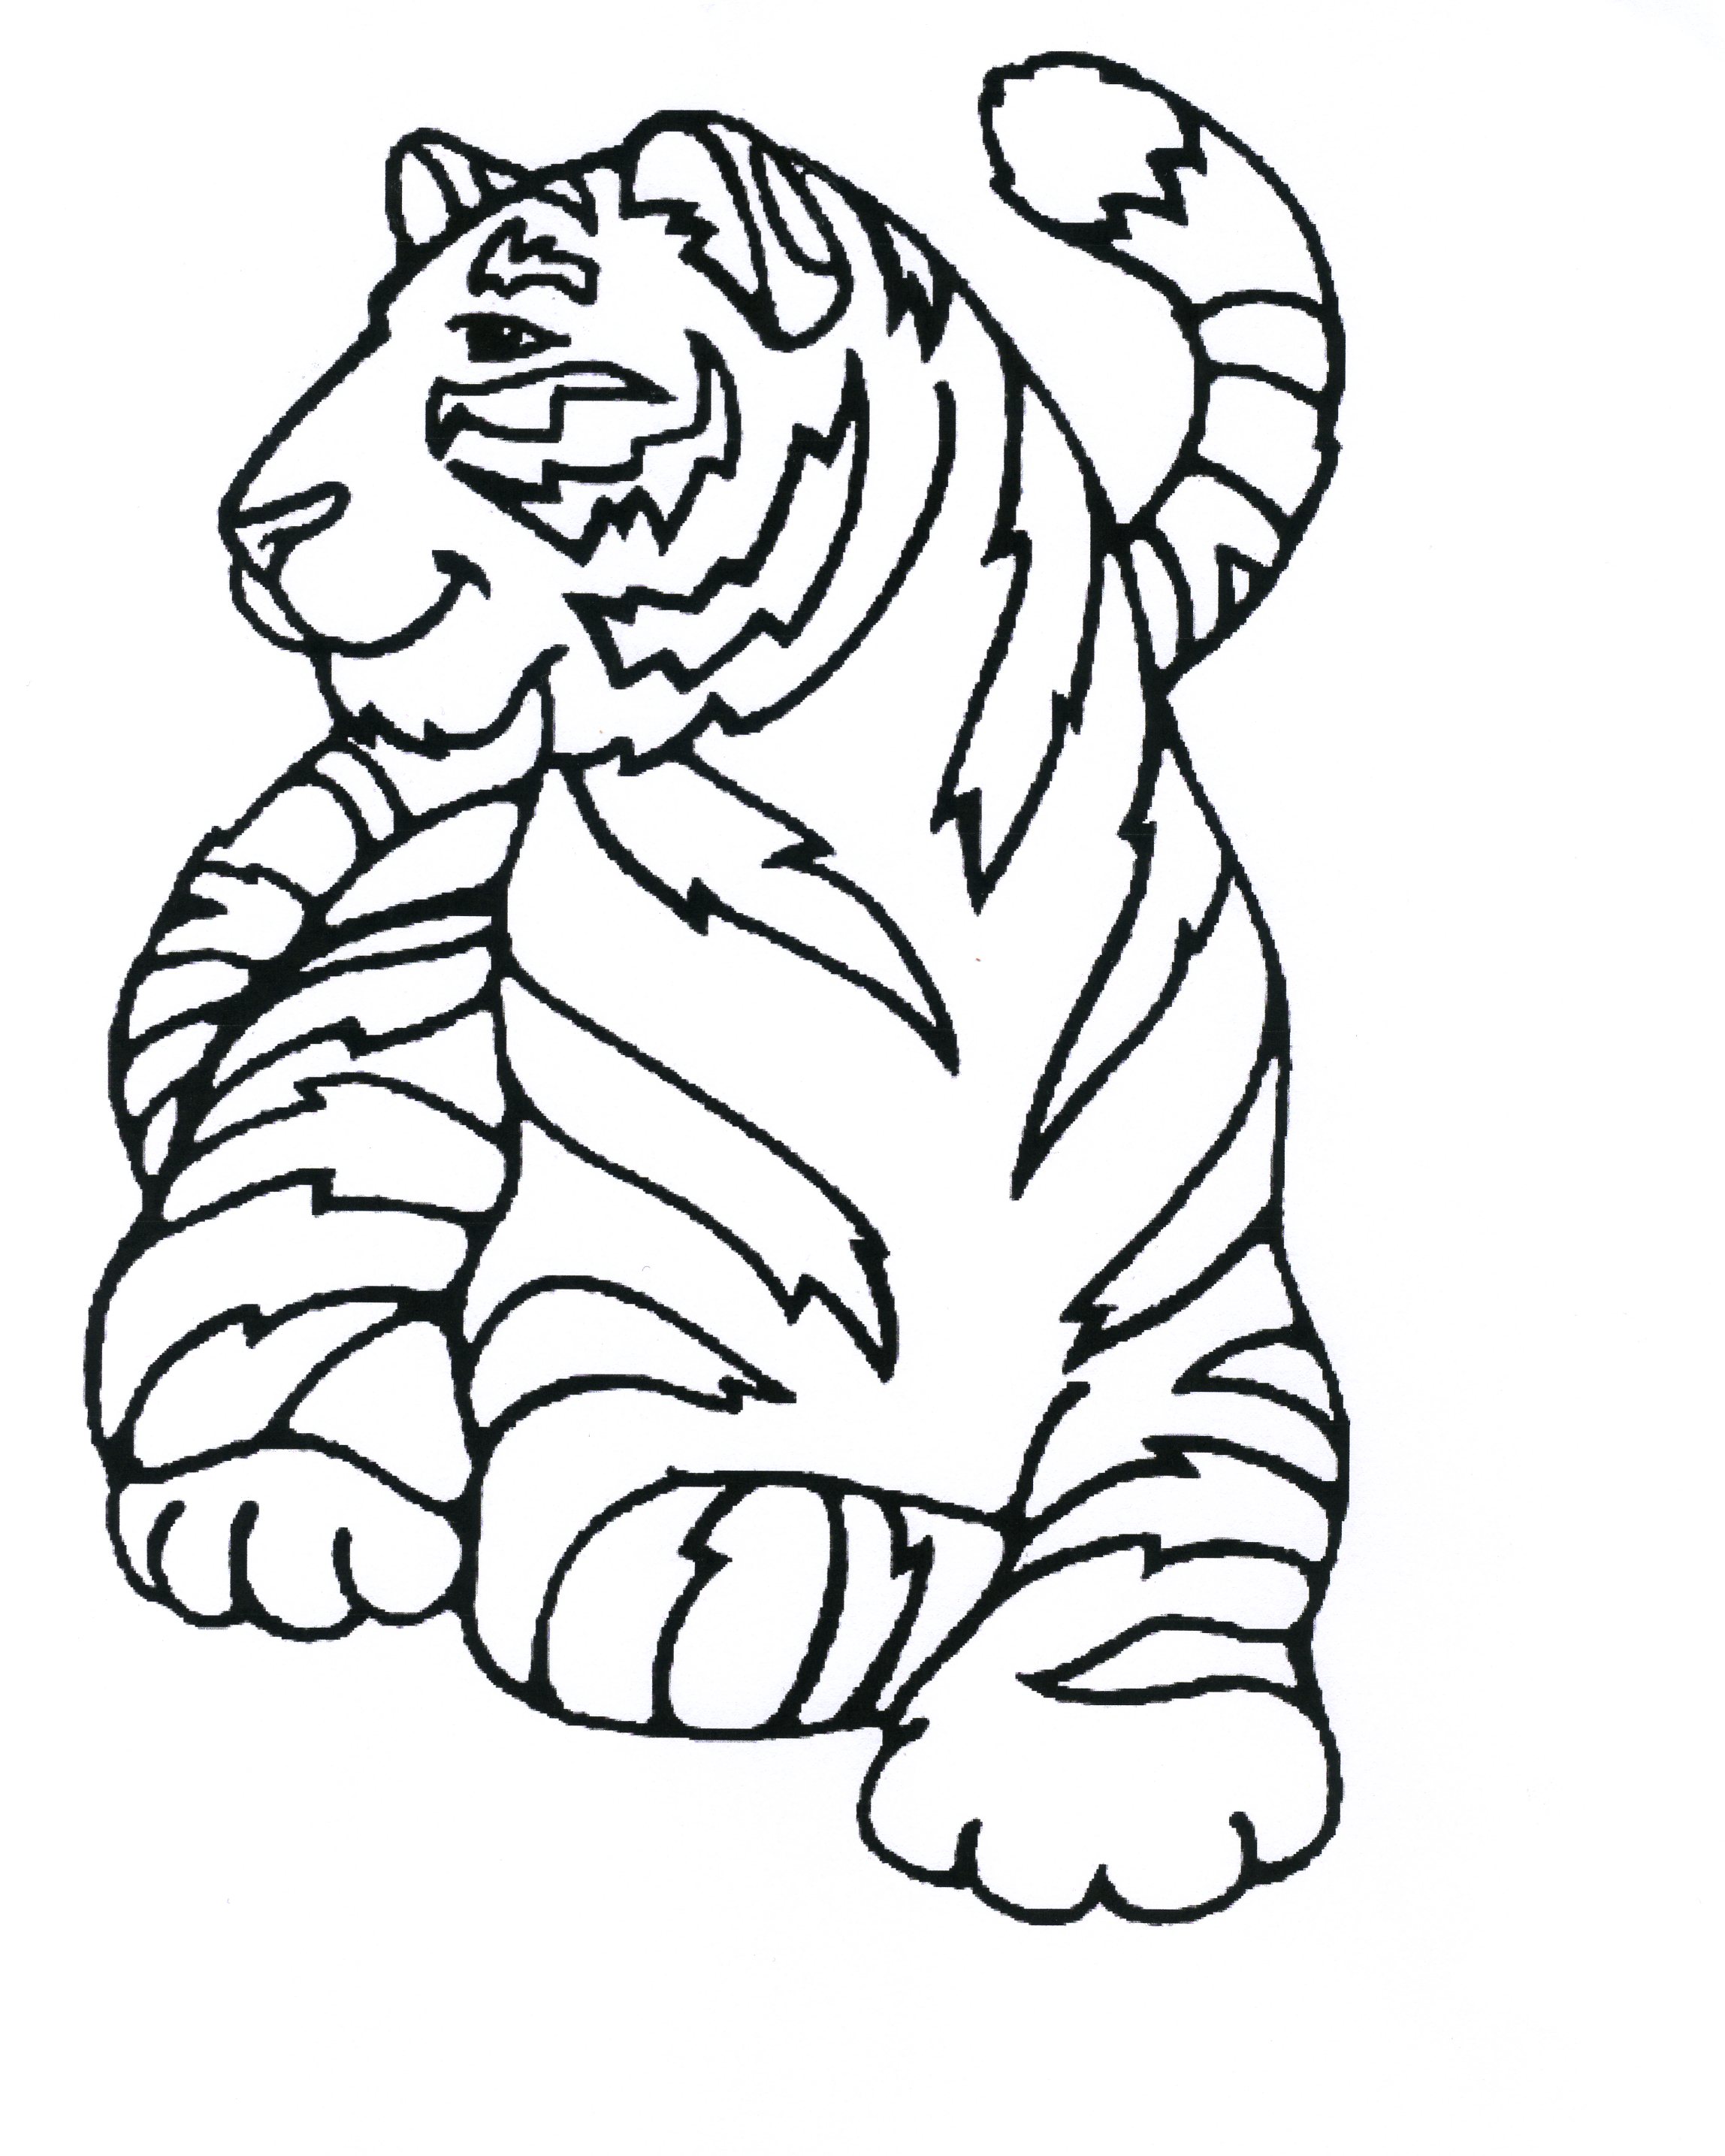 Amazing tiger coloring page